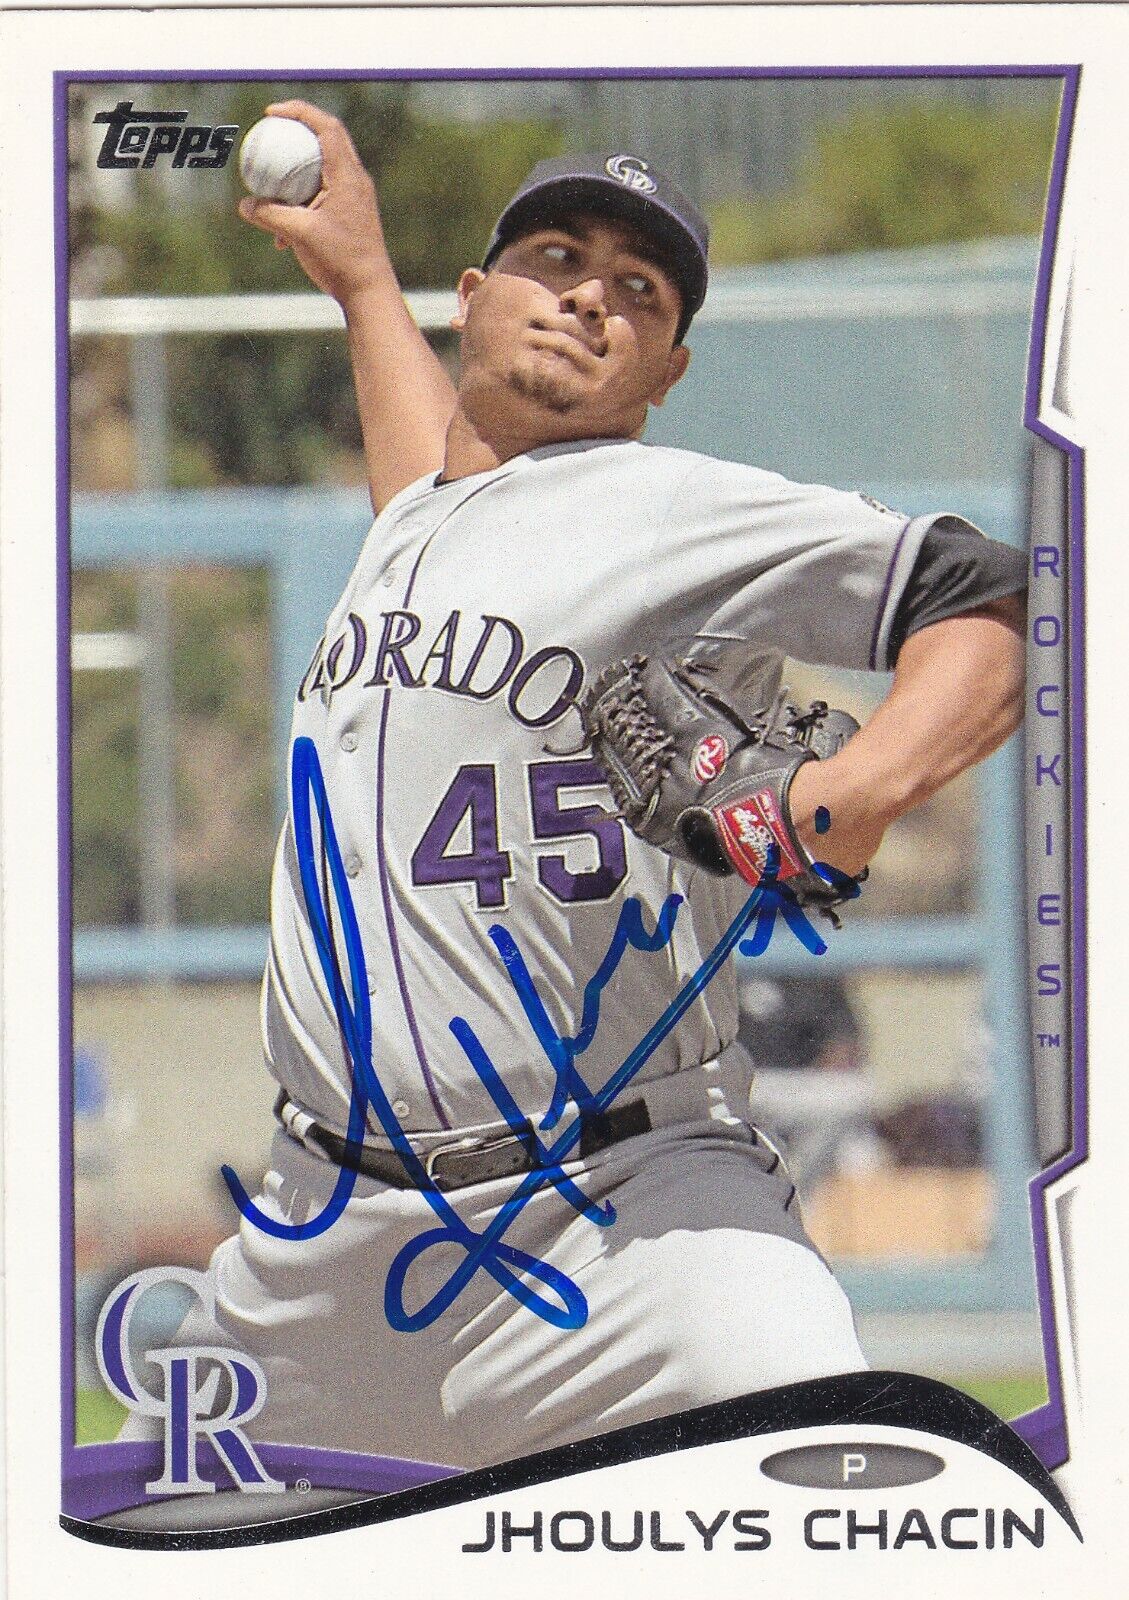 JHOULYS CHACIN COLORADO ROCKIES SIGNED CARD BRAVES ANGELS BREWERS RED SOX PADRES